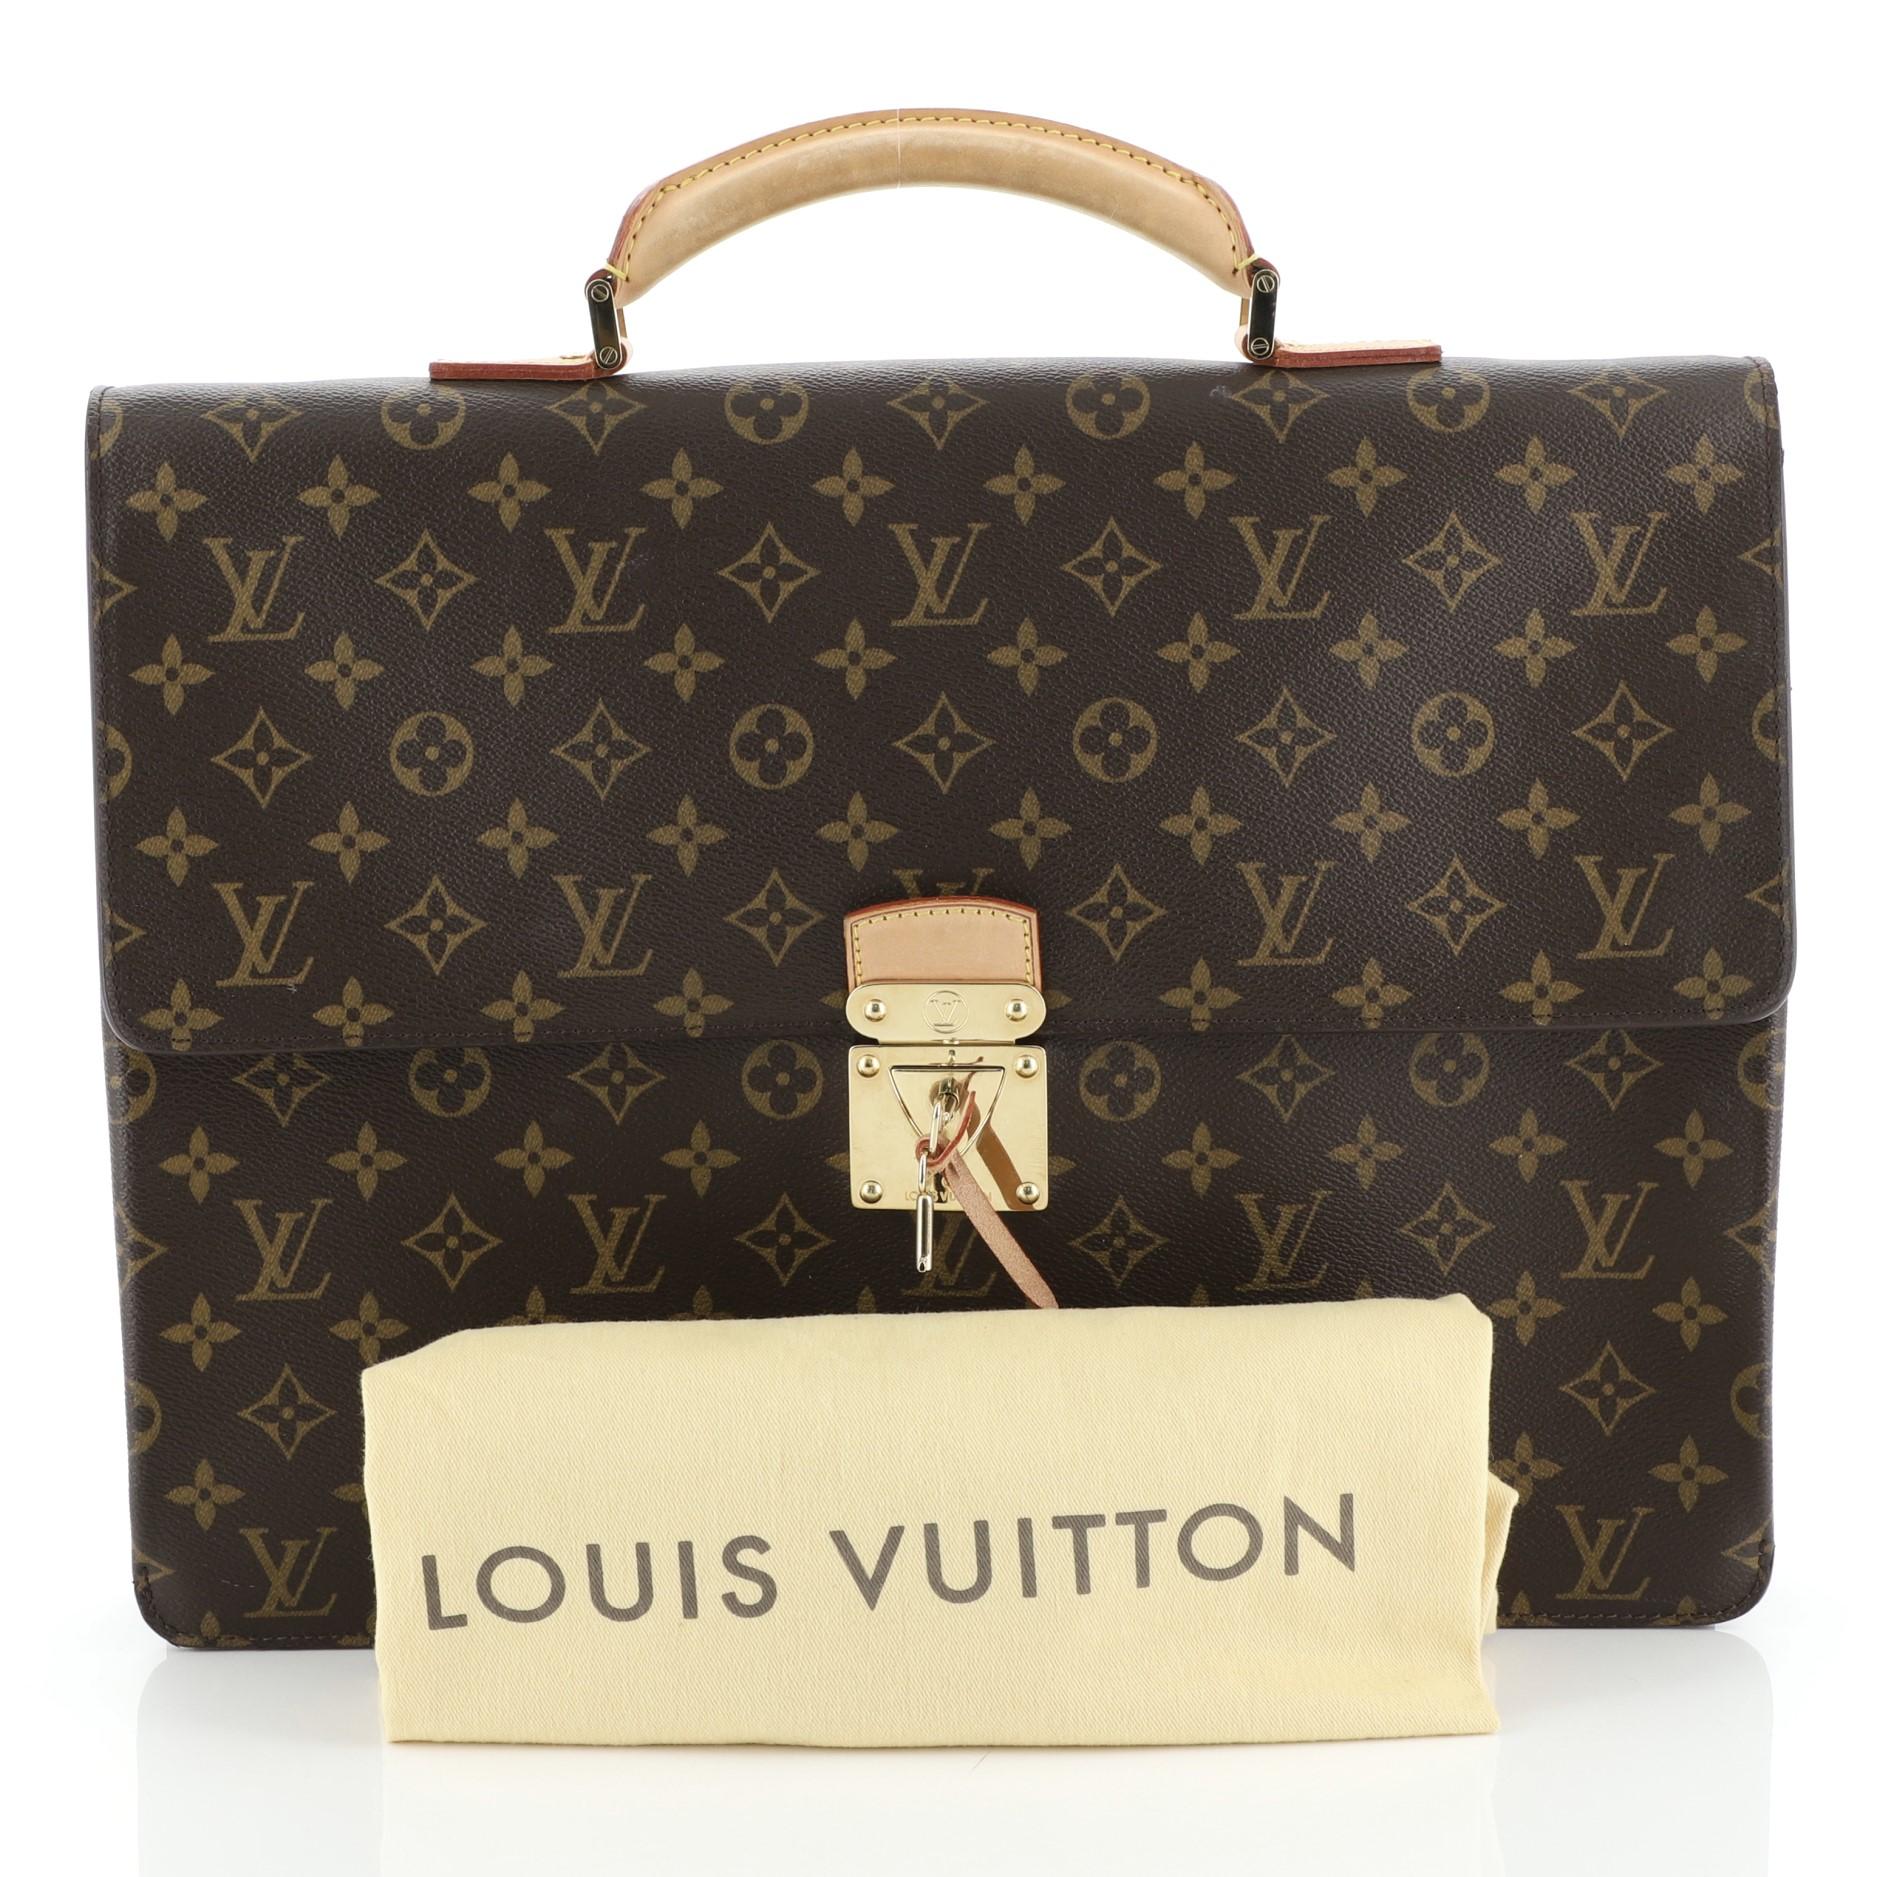 This Louis Vuitton Laguito Handbag Monogram Canvas, crafted from brown monogram coated canvas, features a leather handle, exterior back flat pocket and gold-tone hardware. Its S-lock closure opens to a brown fabric interior with zip and slip